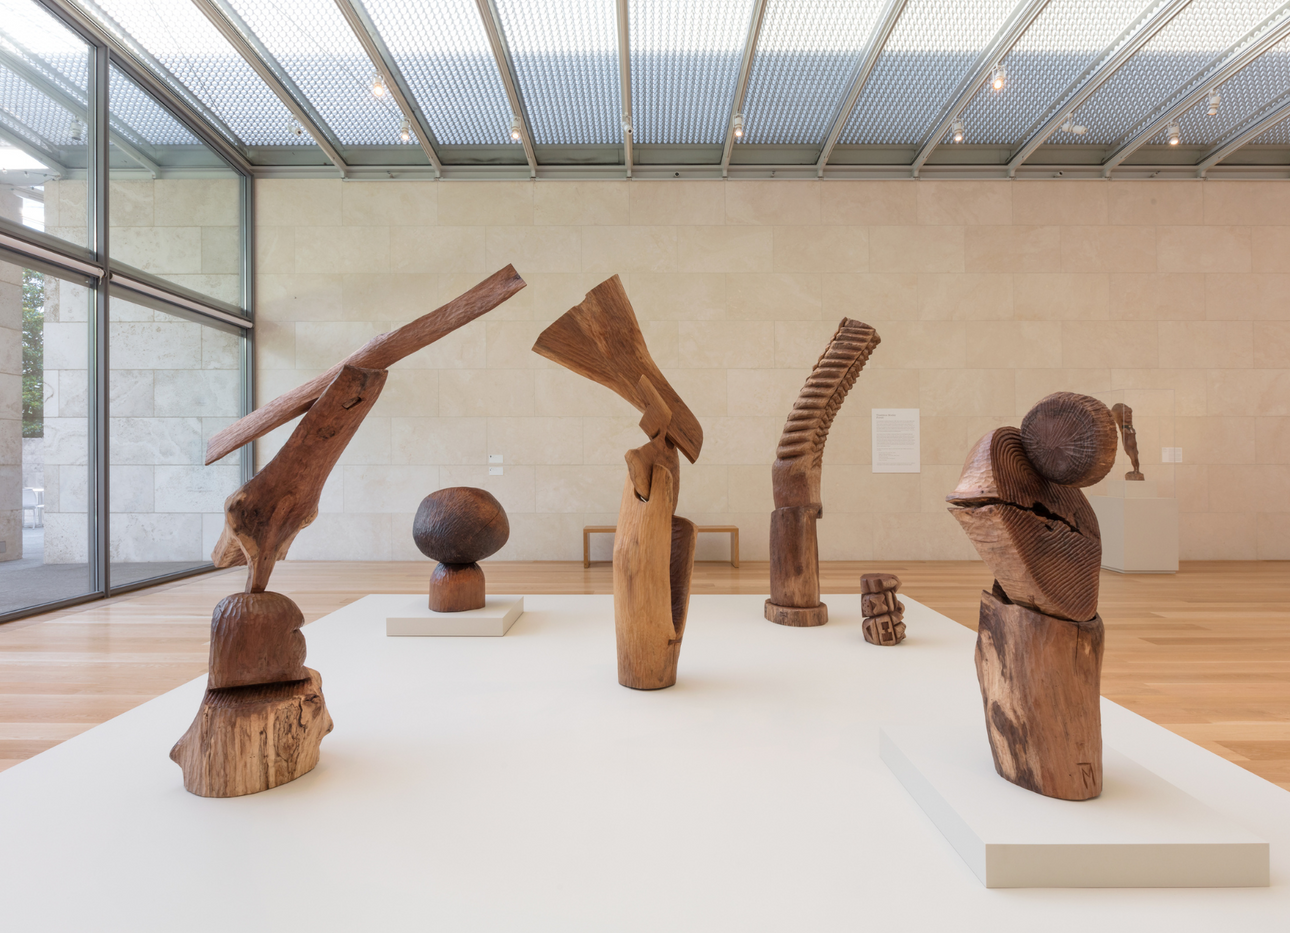 Installation view of “Thaddeus Mosley: Forest” at the Nasher Sculpture Center in Dallas. (Photo: Kevin Todora. Courtesy Nasher Sculpture Center)